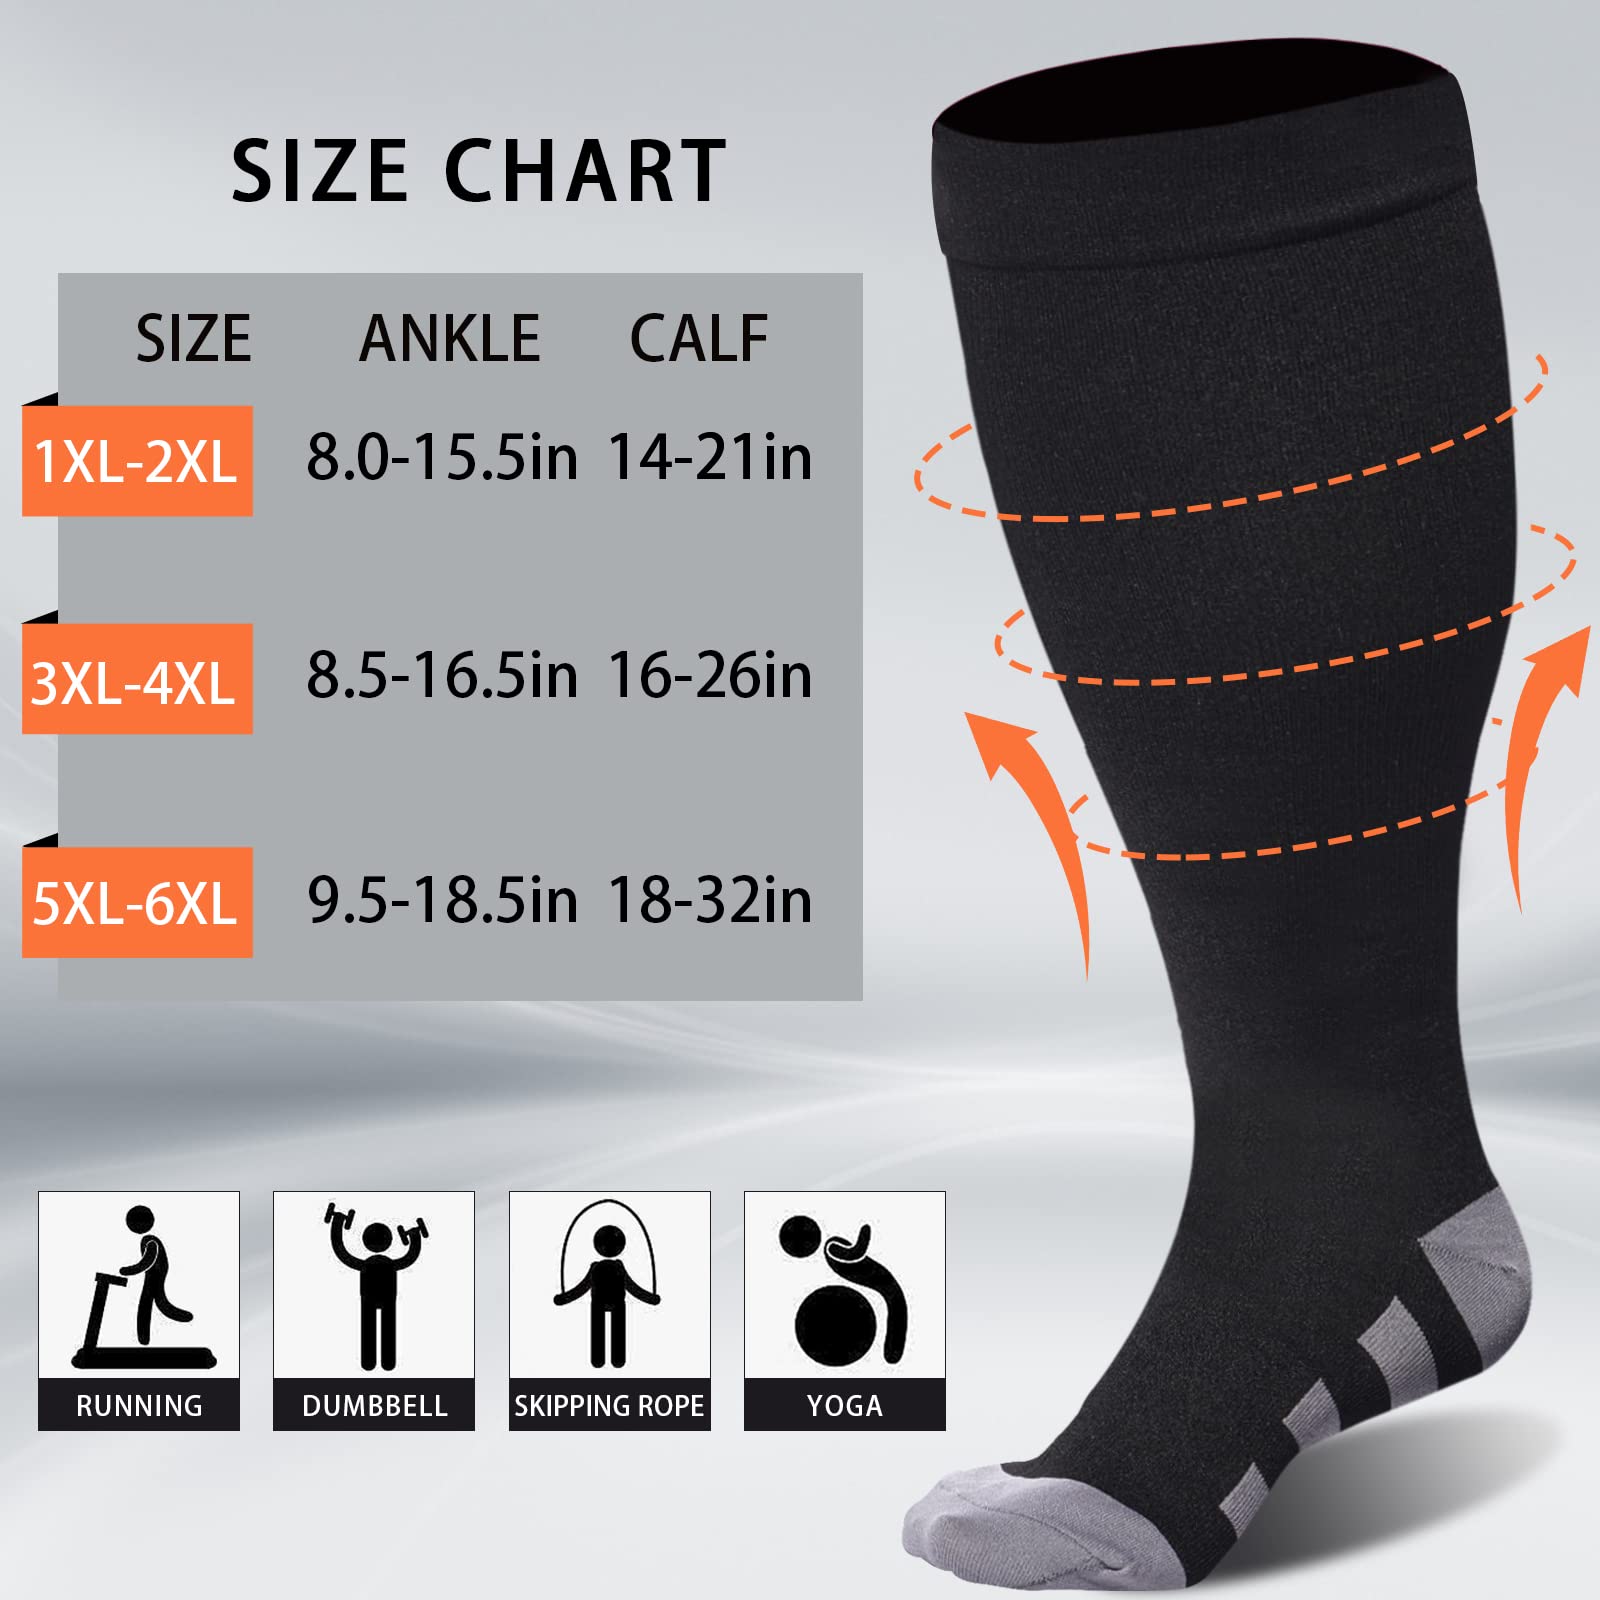 3 Pairs Plus Size Knee High Compression Socks for Women & Men-Black - Moon Wood